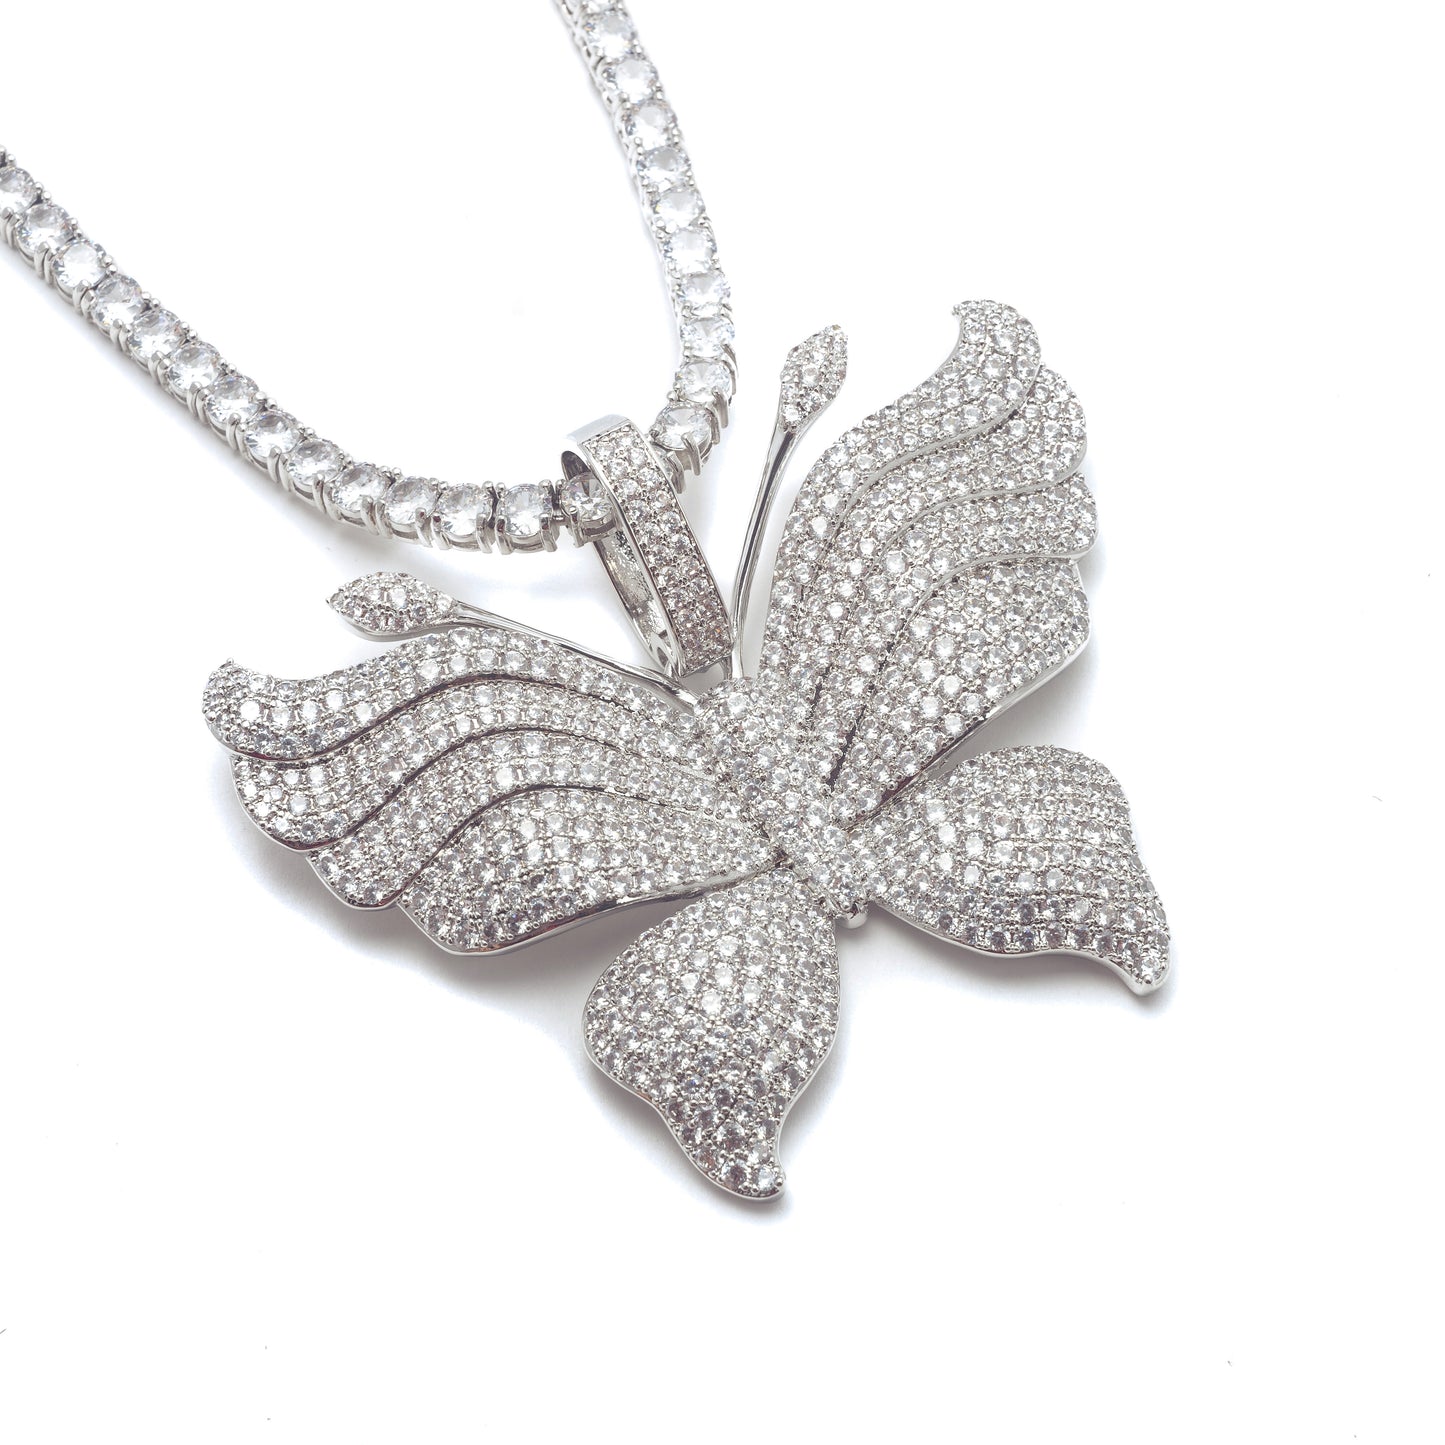 SERENITY BUTTERFLY NECKLACE